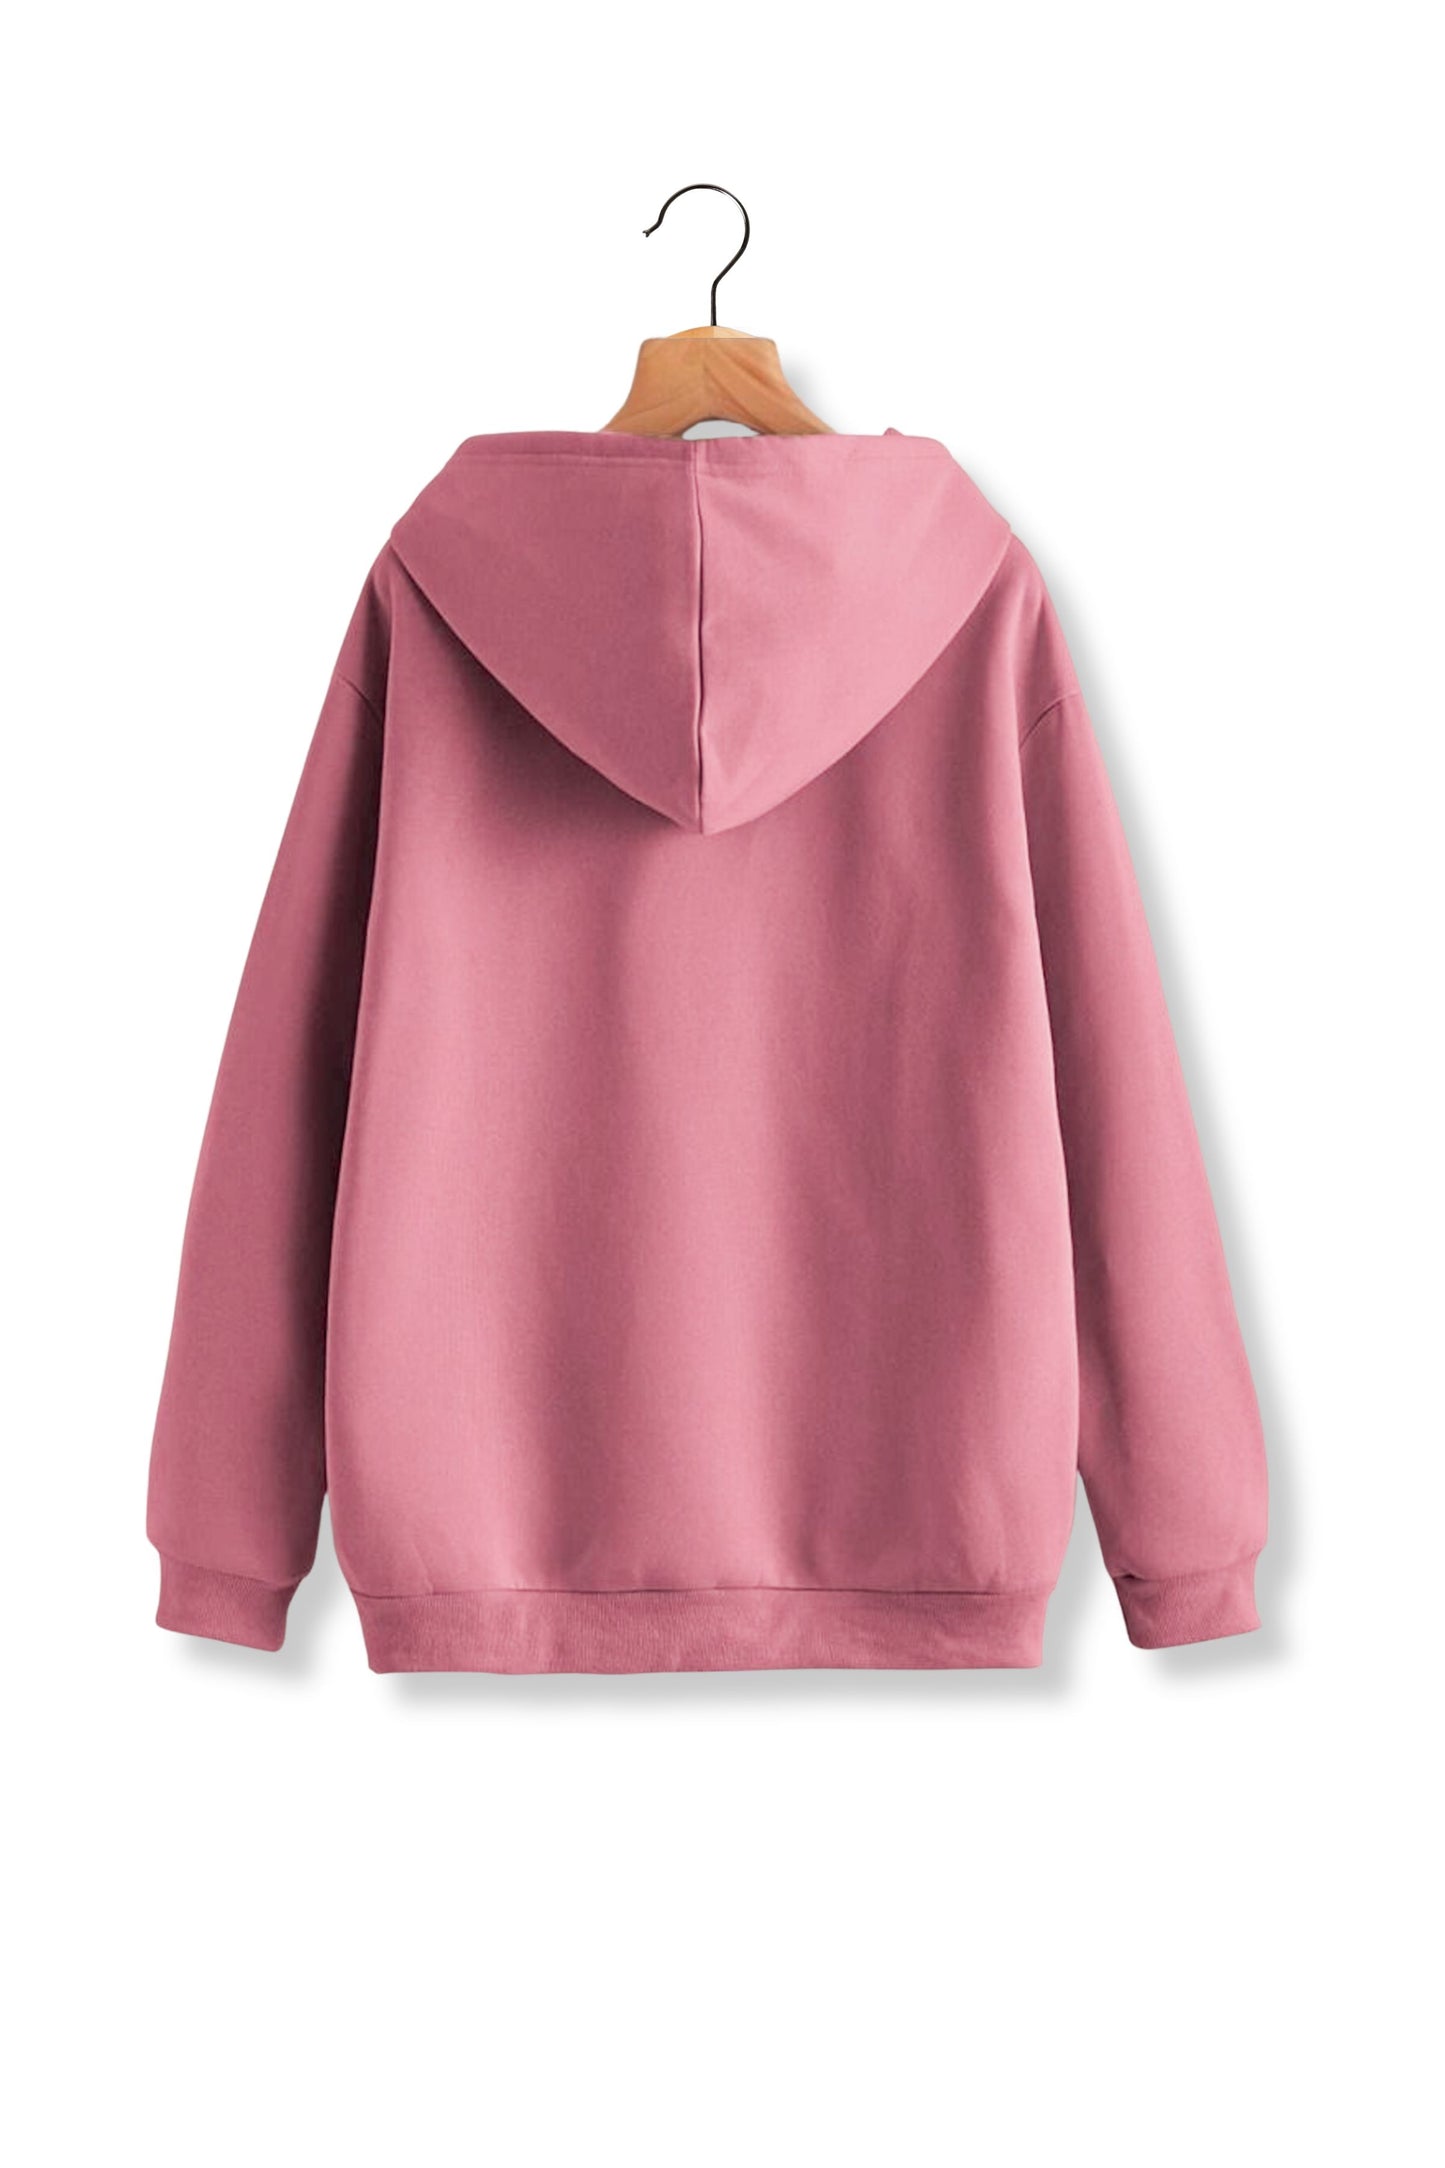 Unisex French Terry Hoodies - Baby Pink